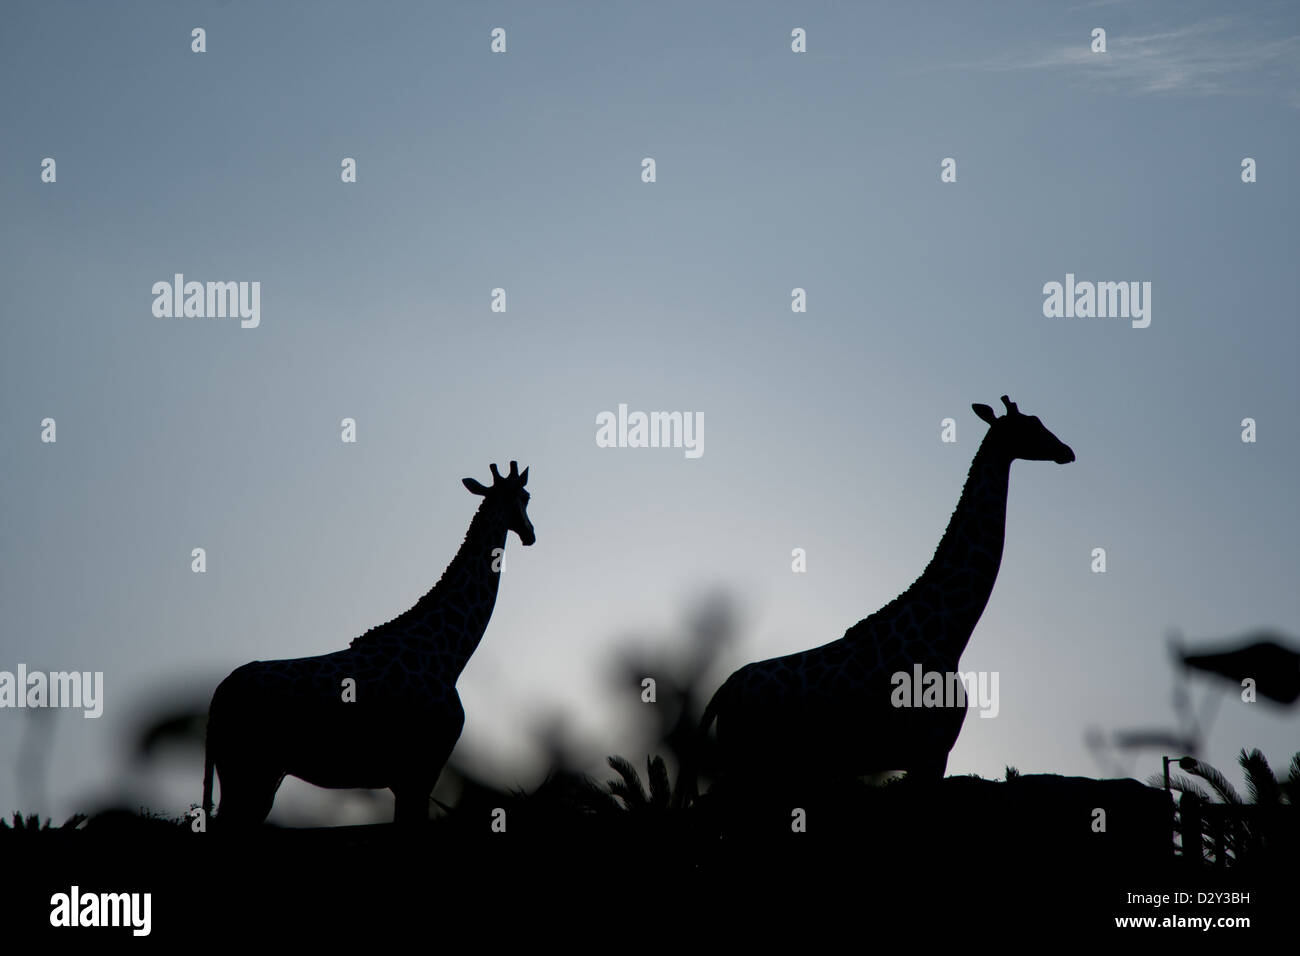 Silhouette of two giraffes Stock Photo